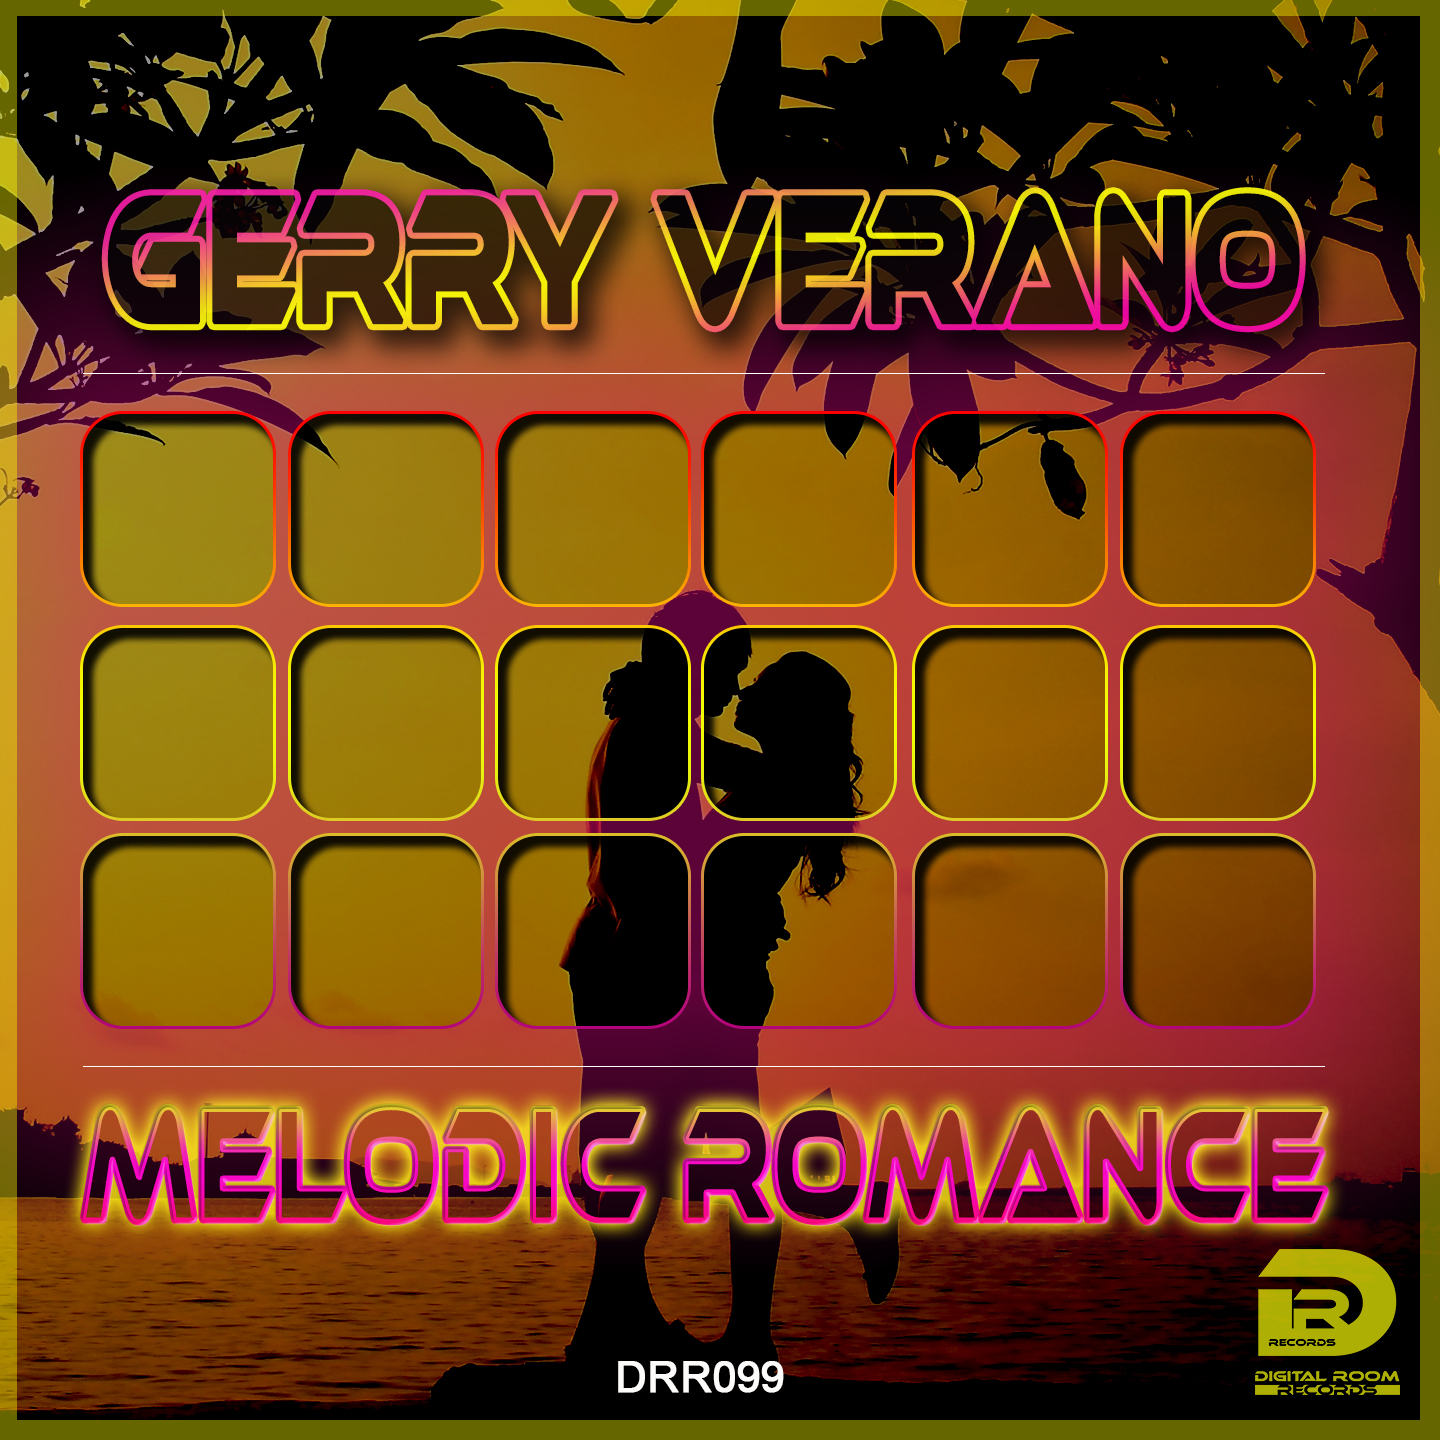 Melodic Romance by Gerry Verano